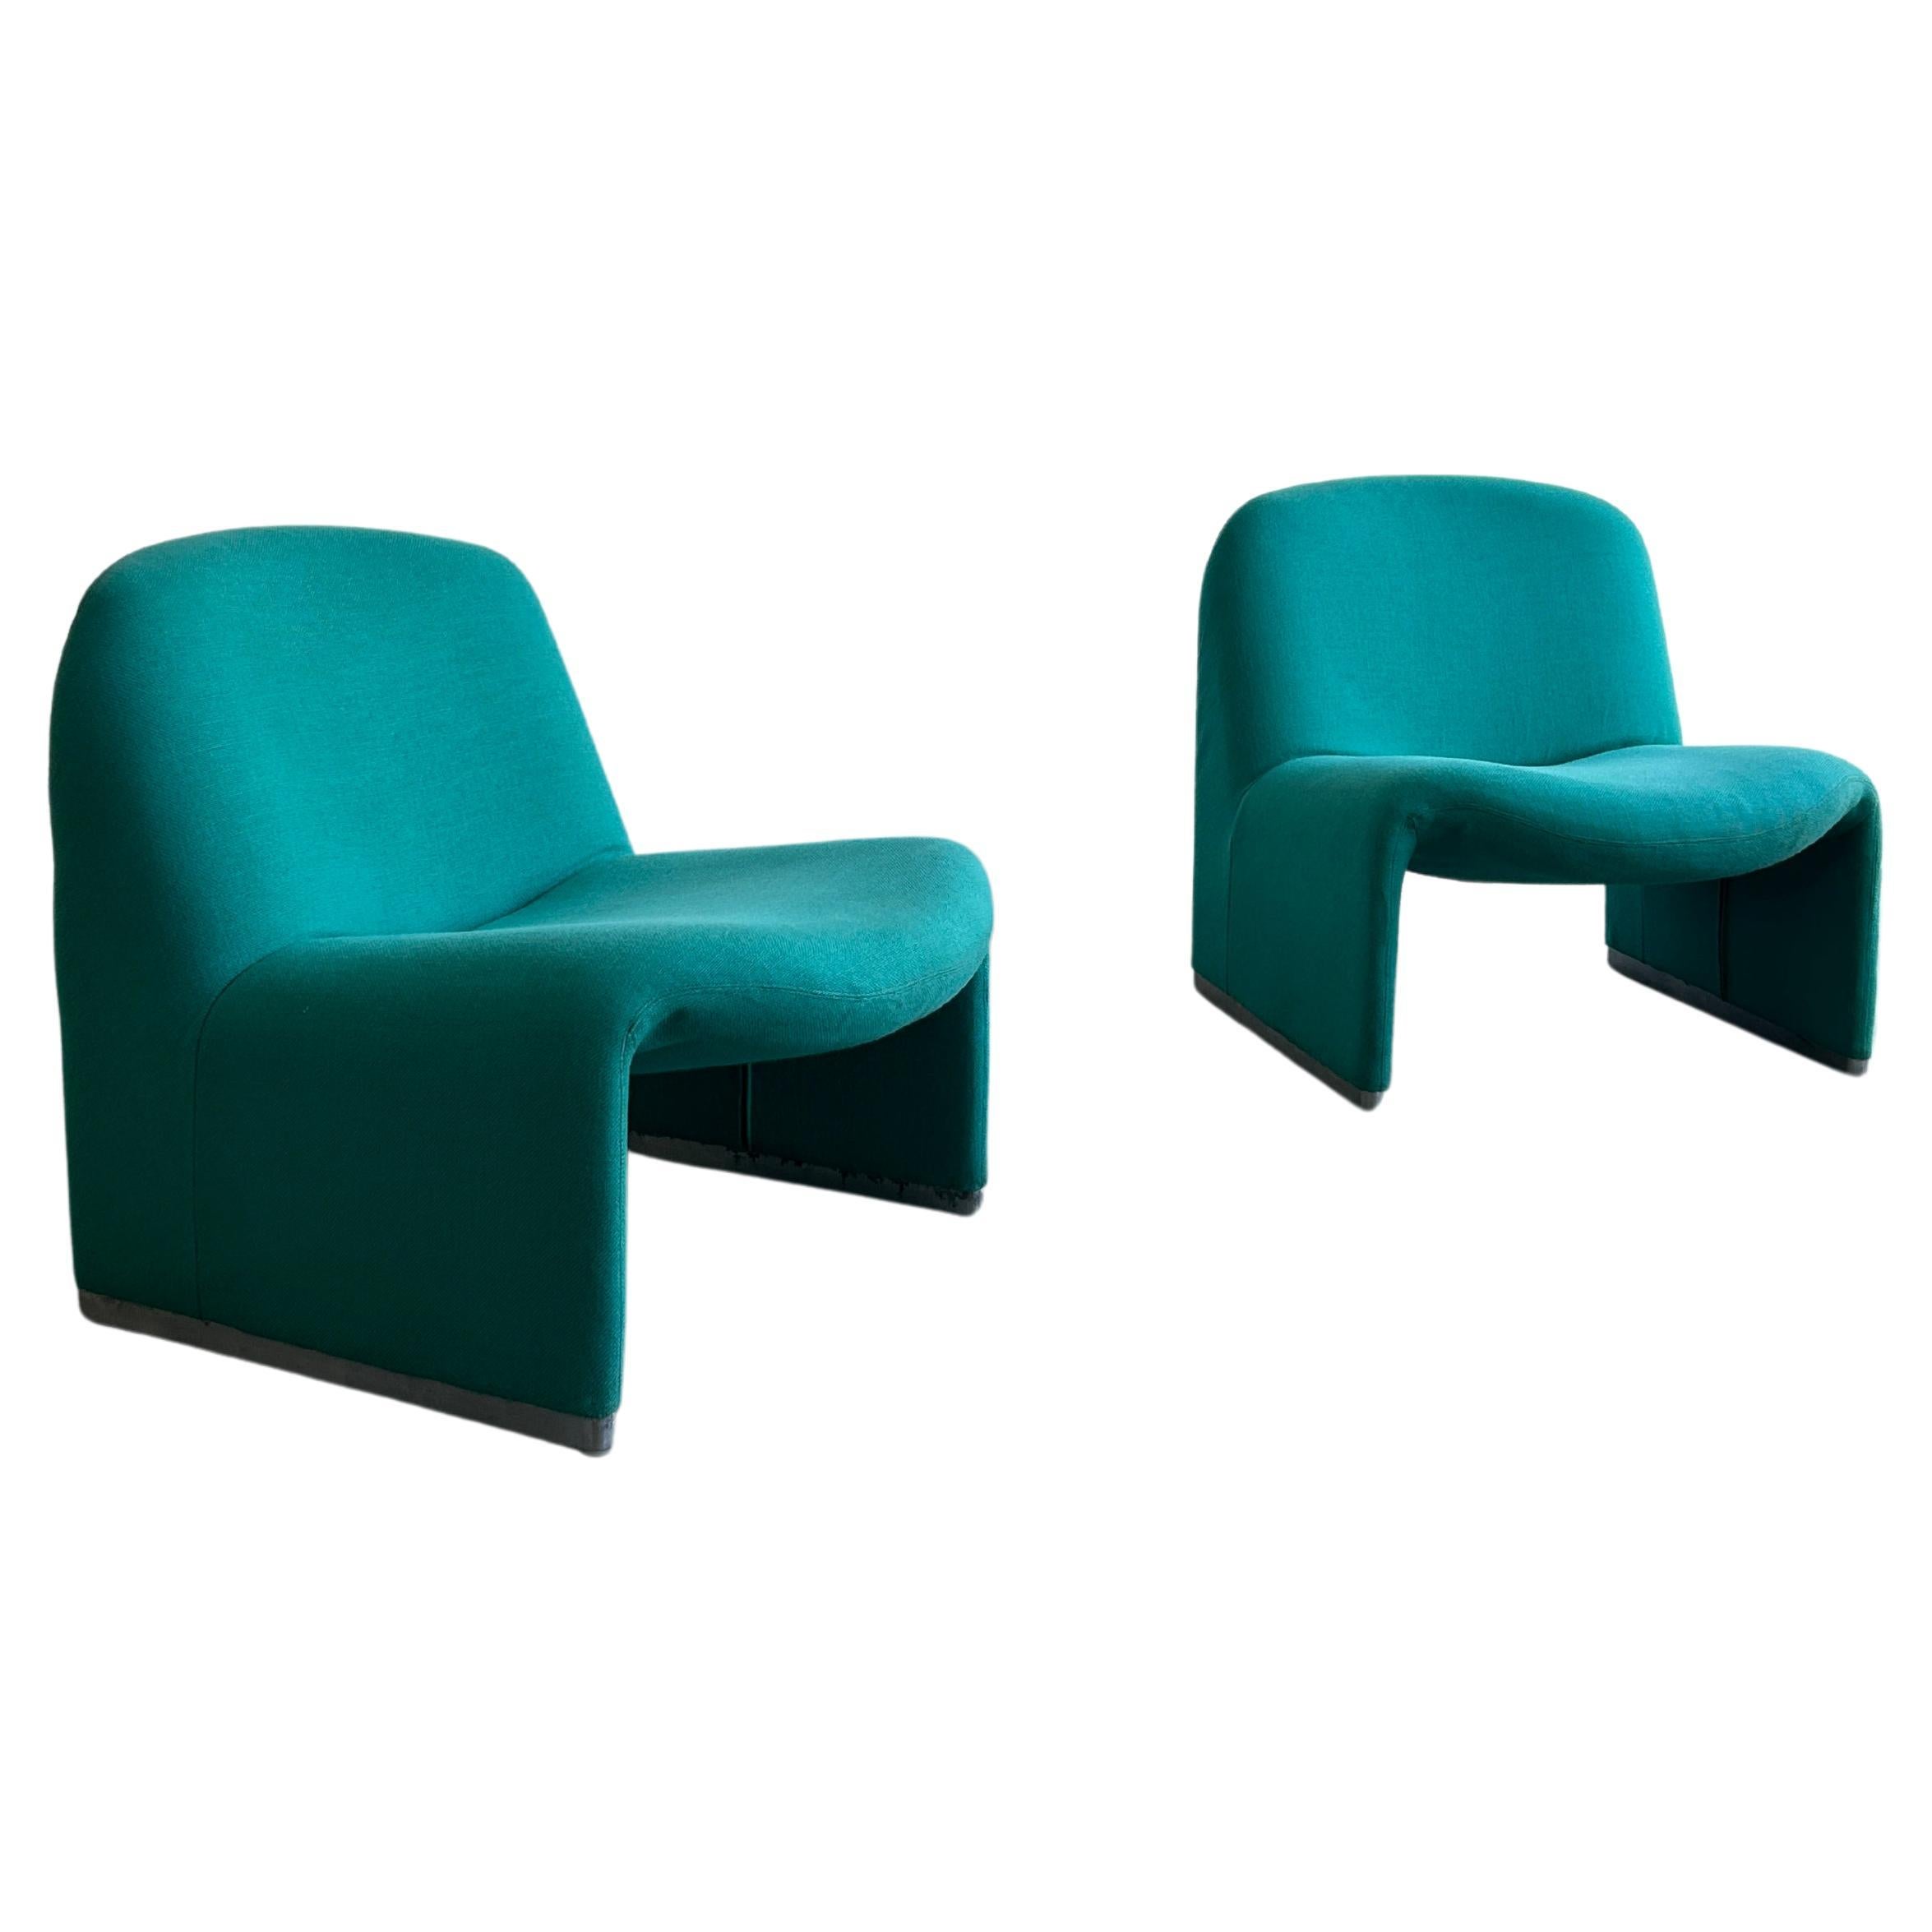 Mid-Century Modern Pair of Alky Chairs by Giancarlo Piretti for Anonima Castelli, 1970s Italy